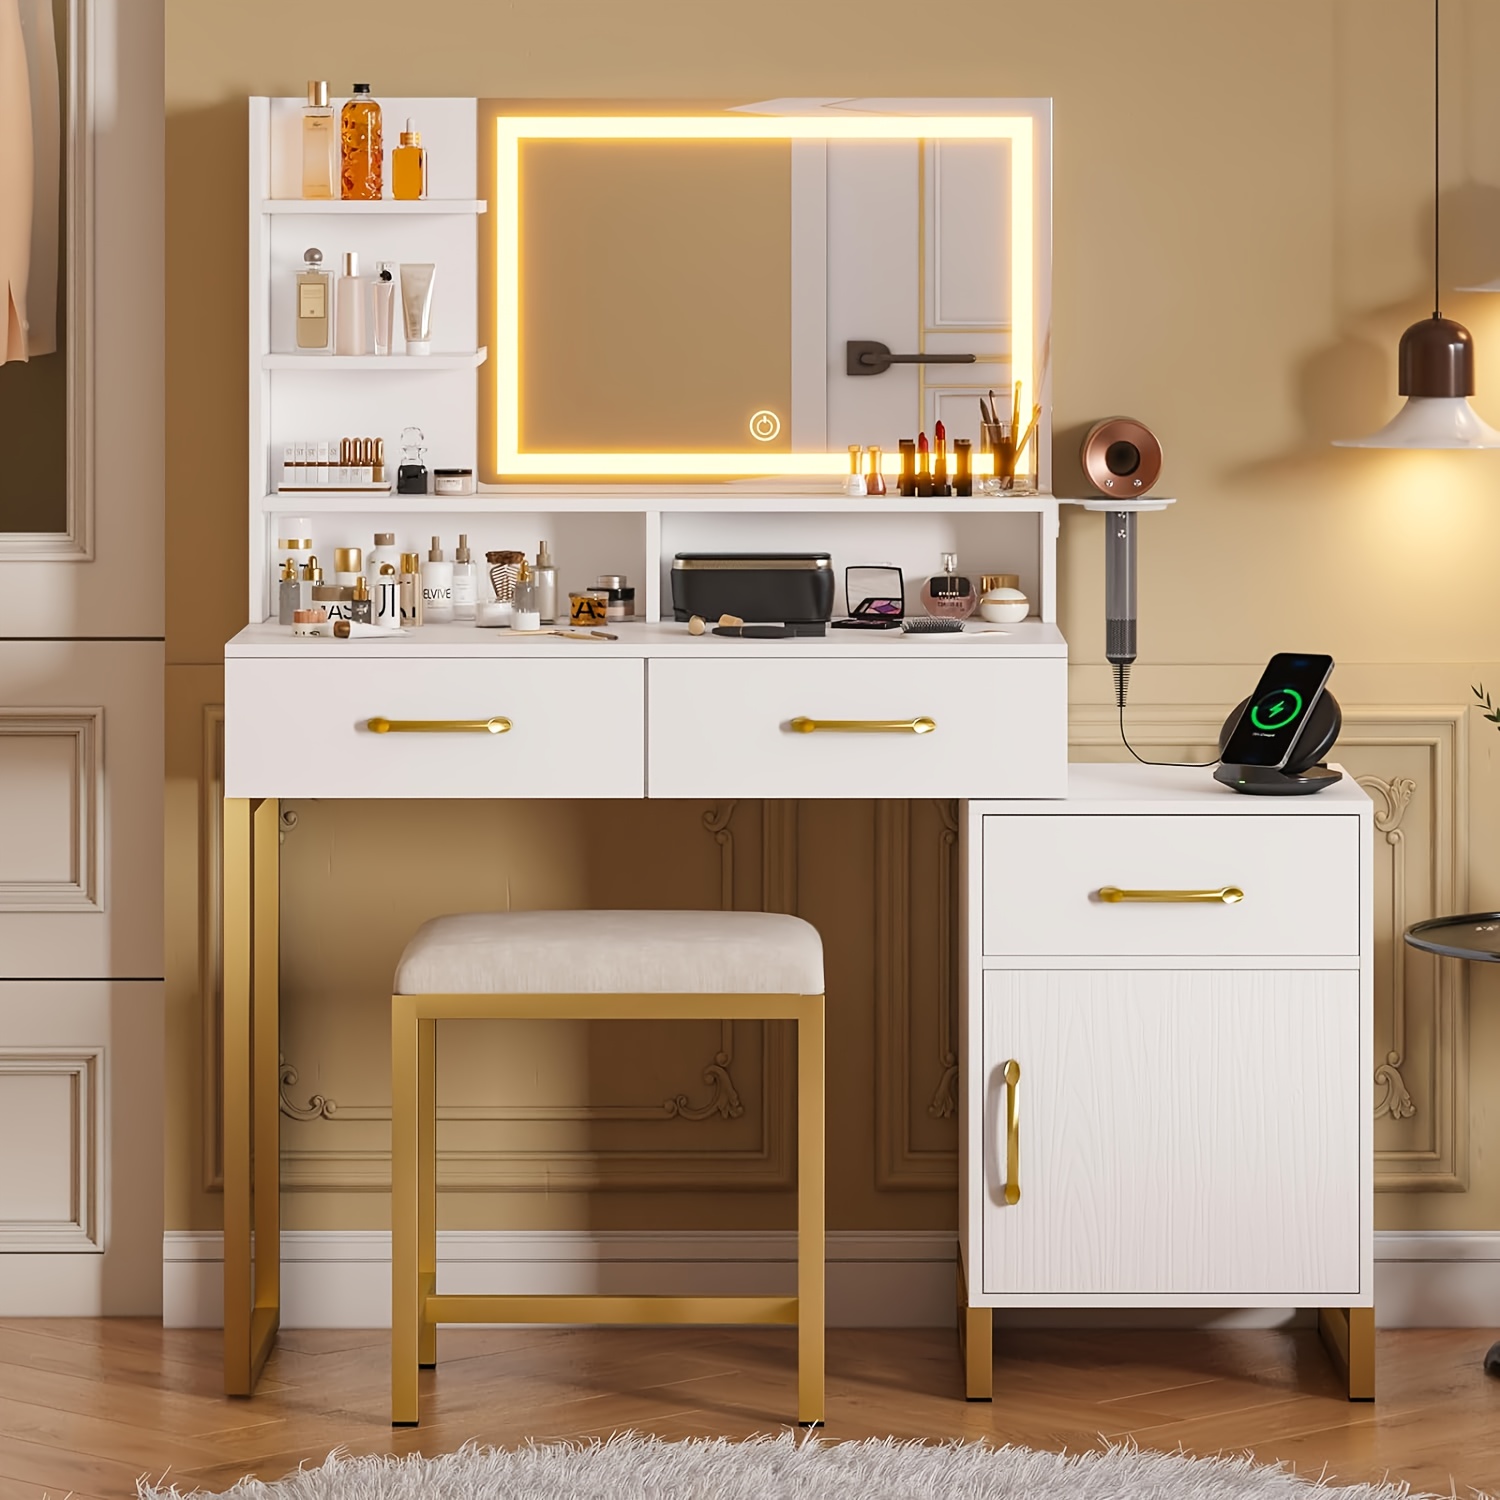 

Vanity Desk With Mirror And Lights, Makeup Vanity Table With Power Outlet, Modern White & Gold Vanity Set With 3 Drawers & Cabinet, 3 Lighting Modes Brightness Adjustable, Bedroom